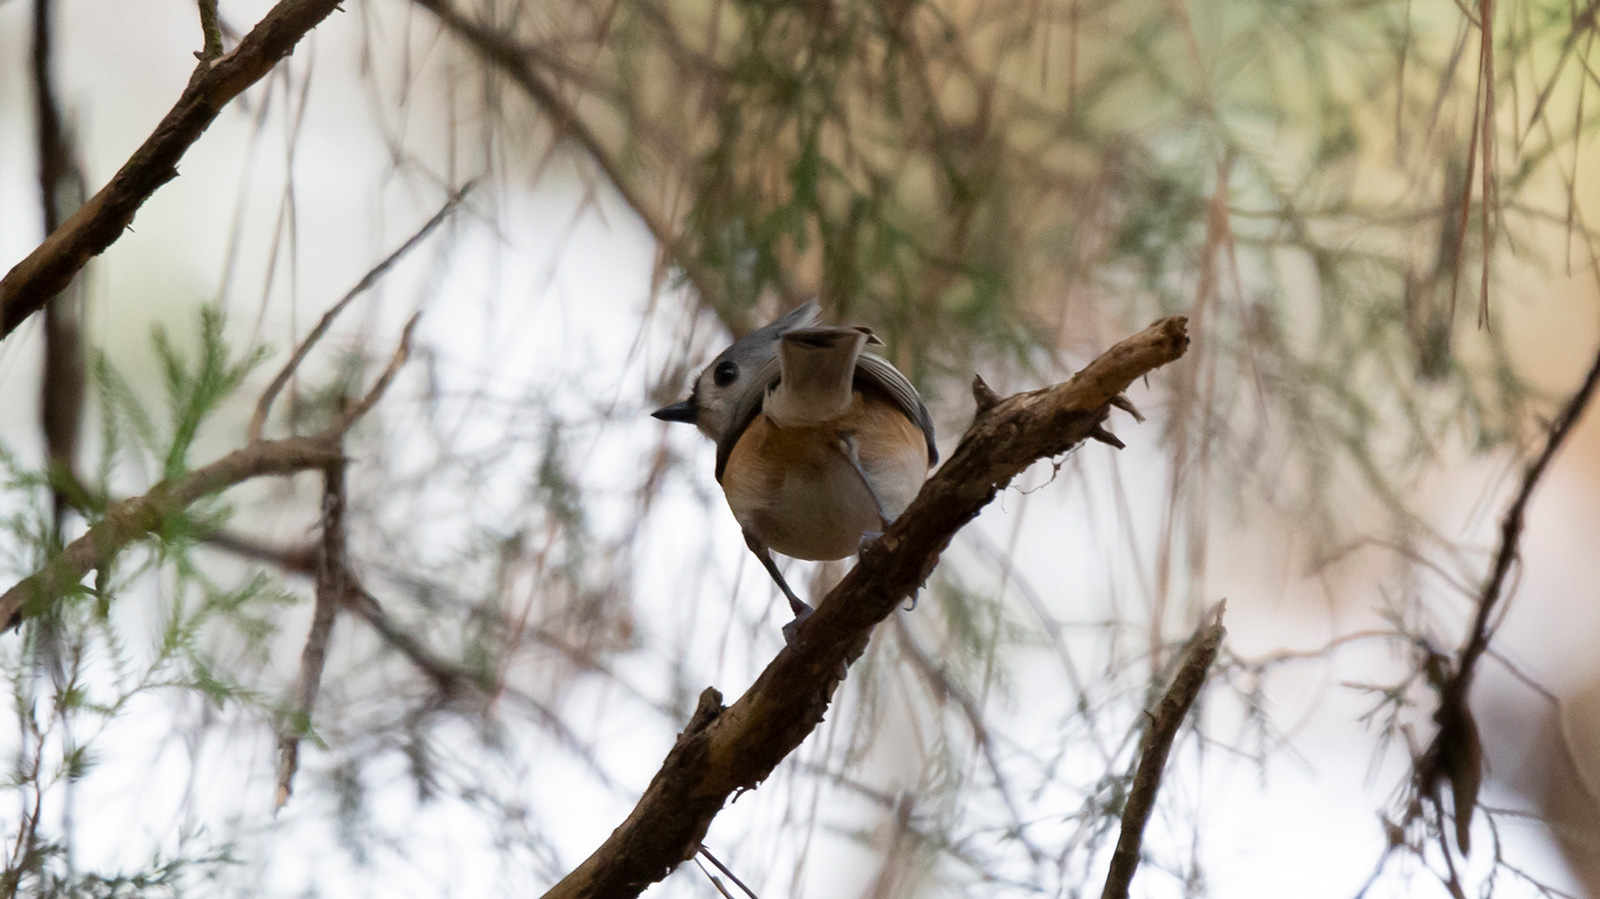 Tufted titmouse looking to the side